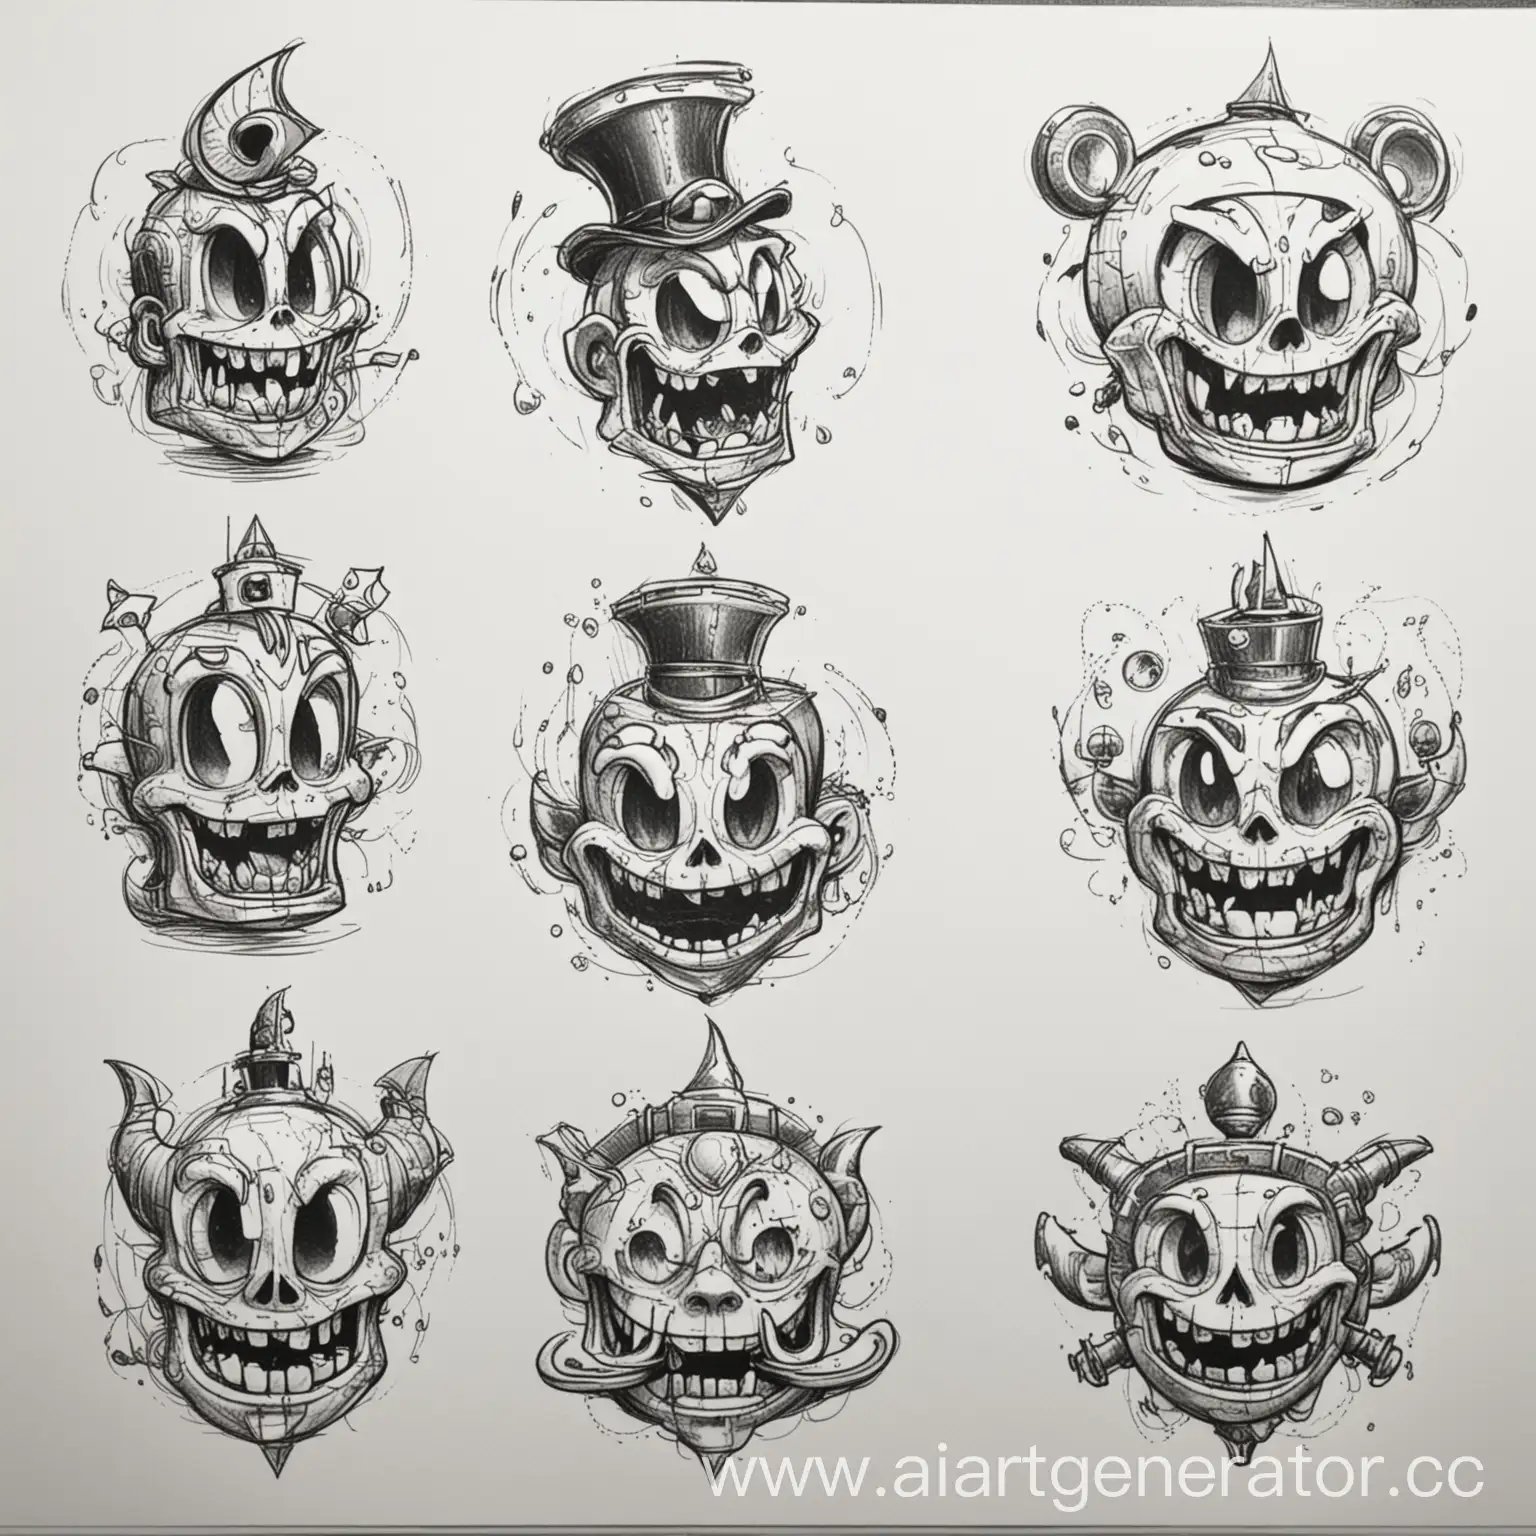 CupheadInspired-Tattoo-Sketches-on-White-Background